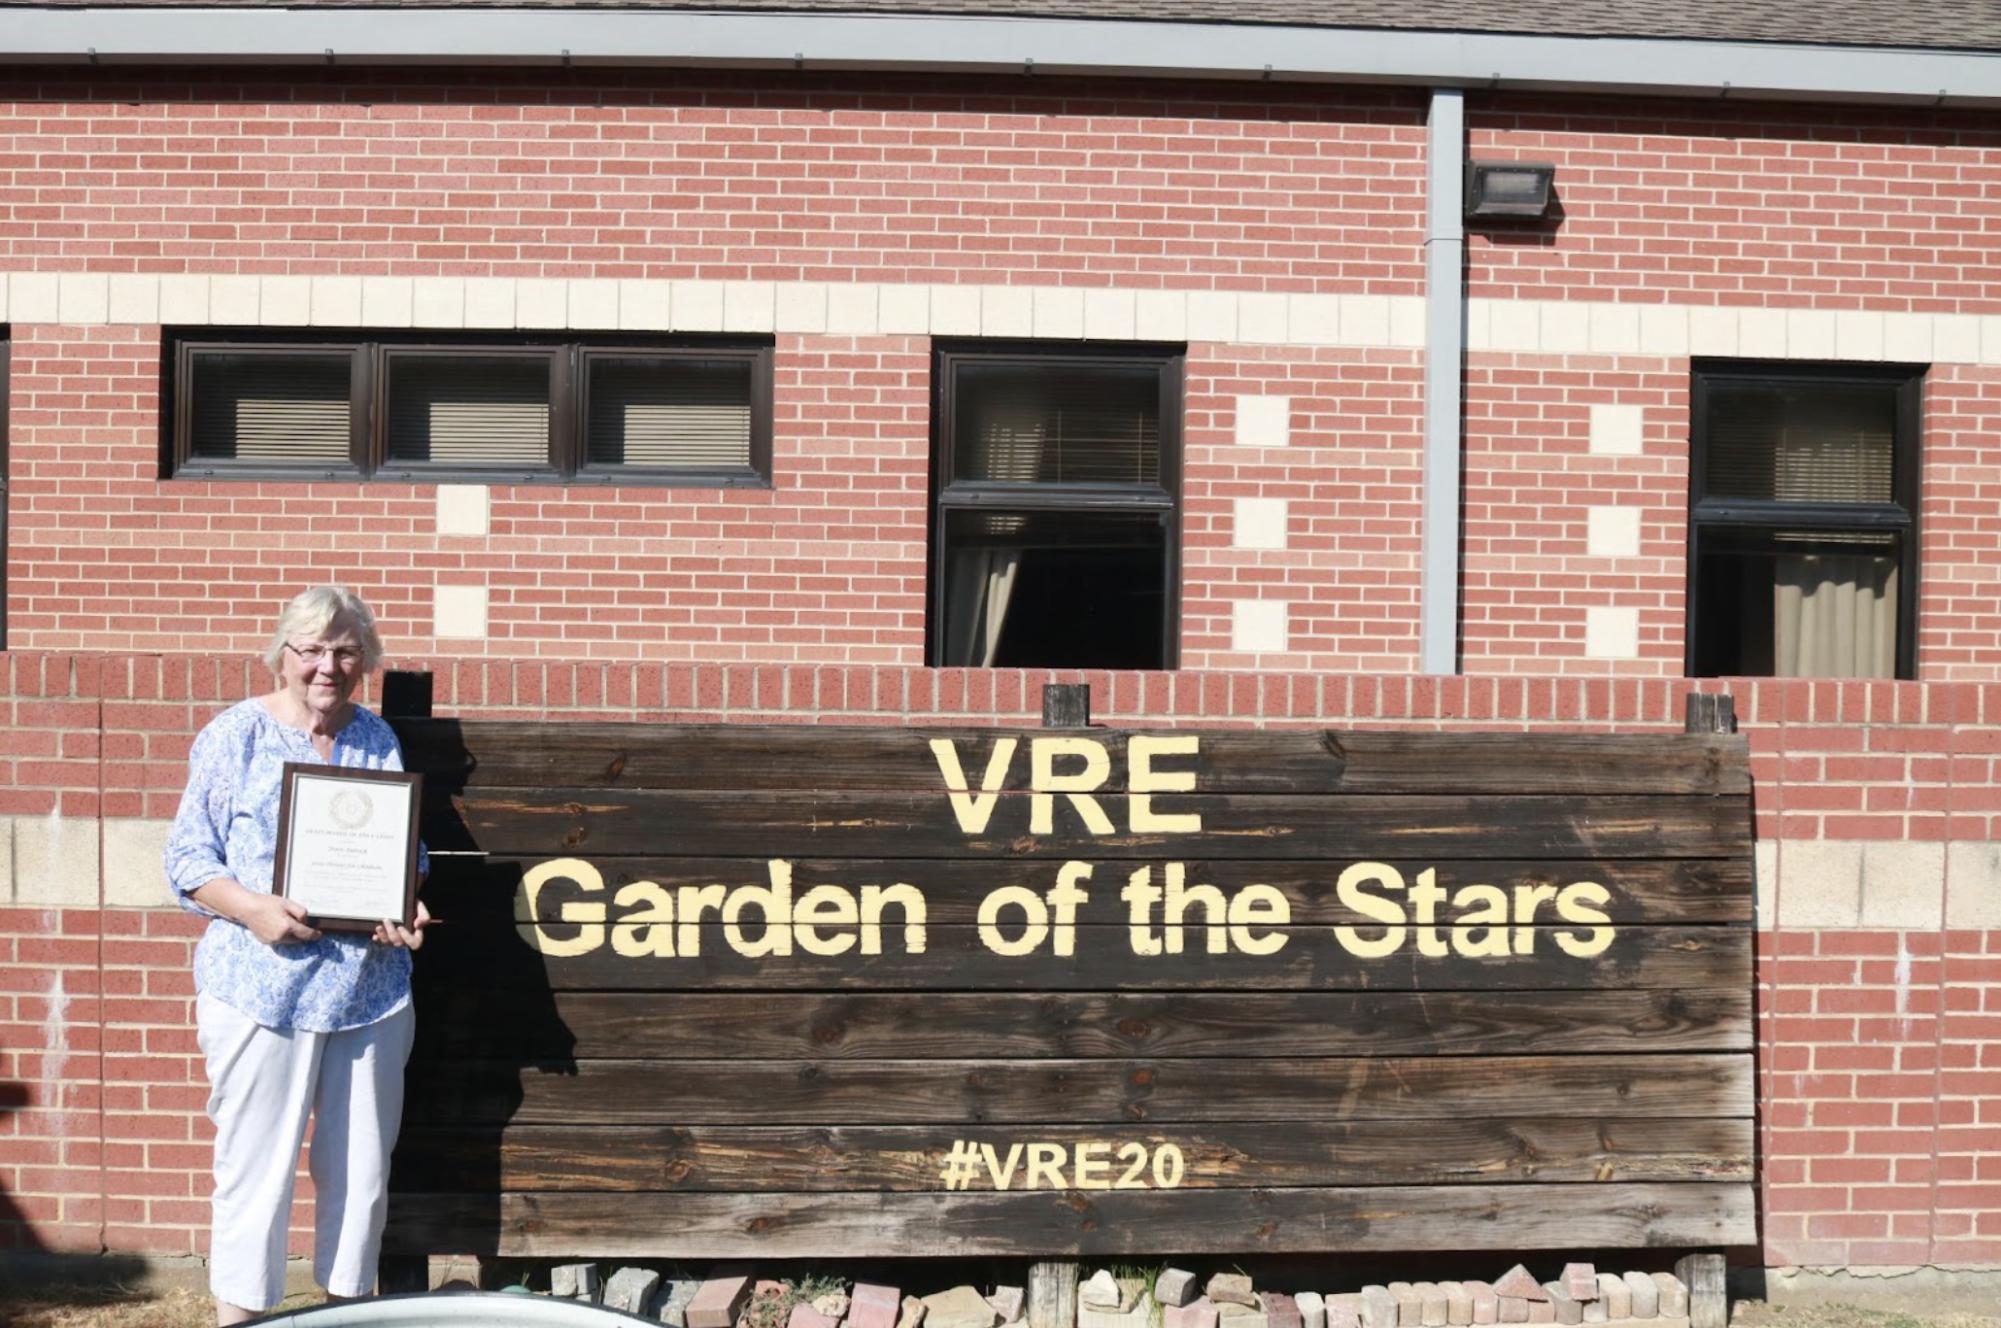 Valley Ranch Elementary School garden volunteer Doris Patrick holds her prestigious Heroes for Children Award in the VRE Garden of the Stars. The Heroes for Children Award is given to residents who commit time and support toward public schools, in which Patrick was one of 15 in Texas to receive the award.
